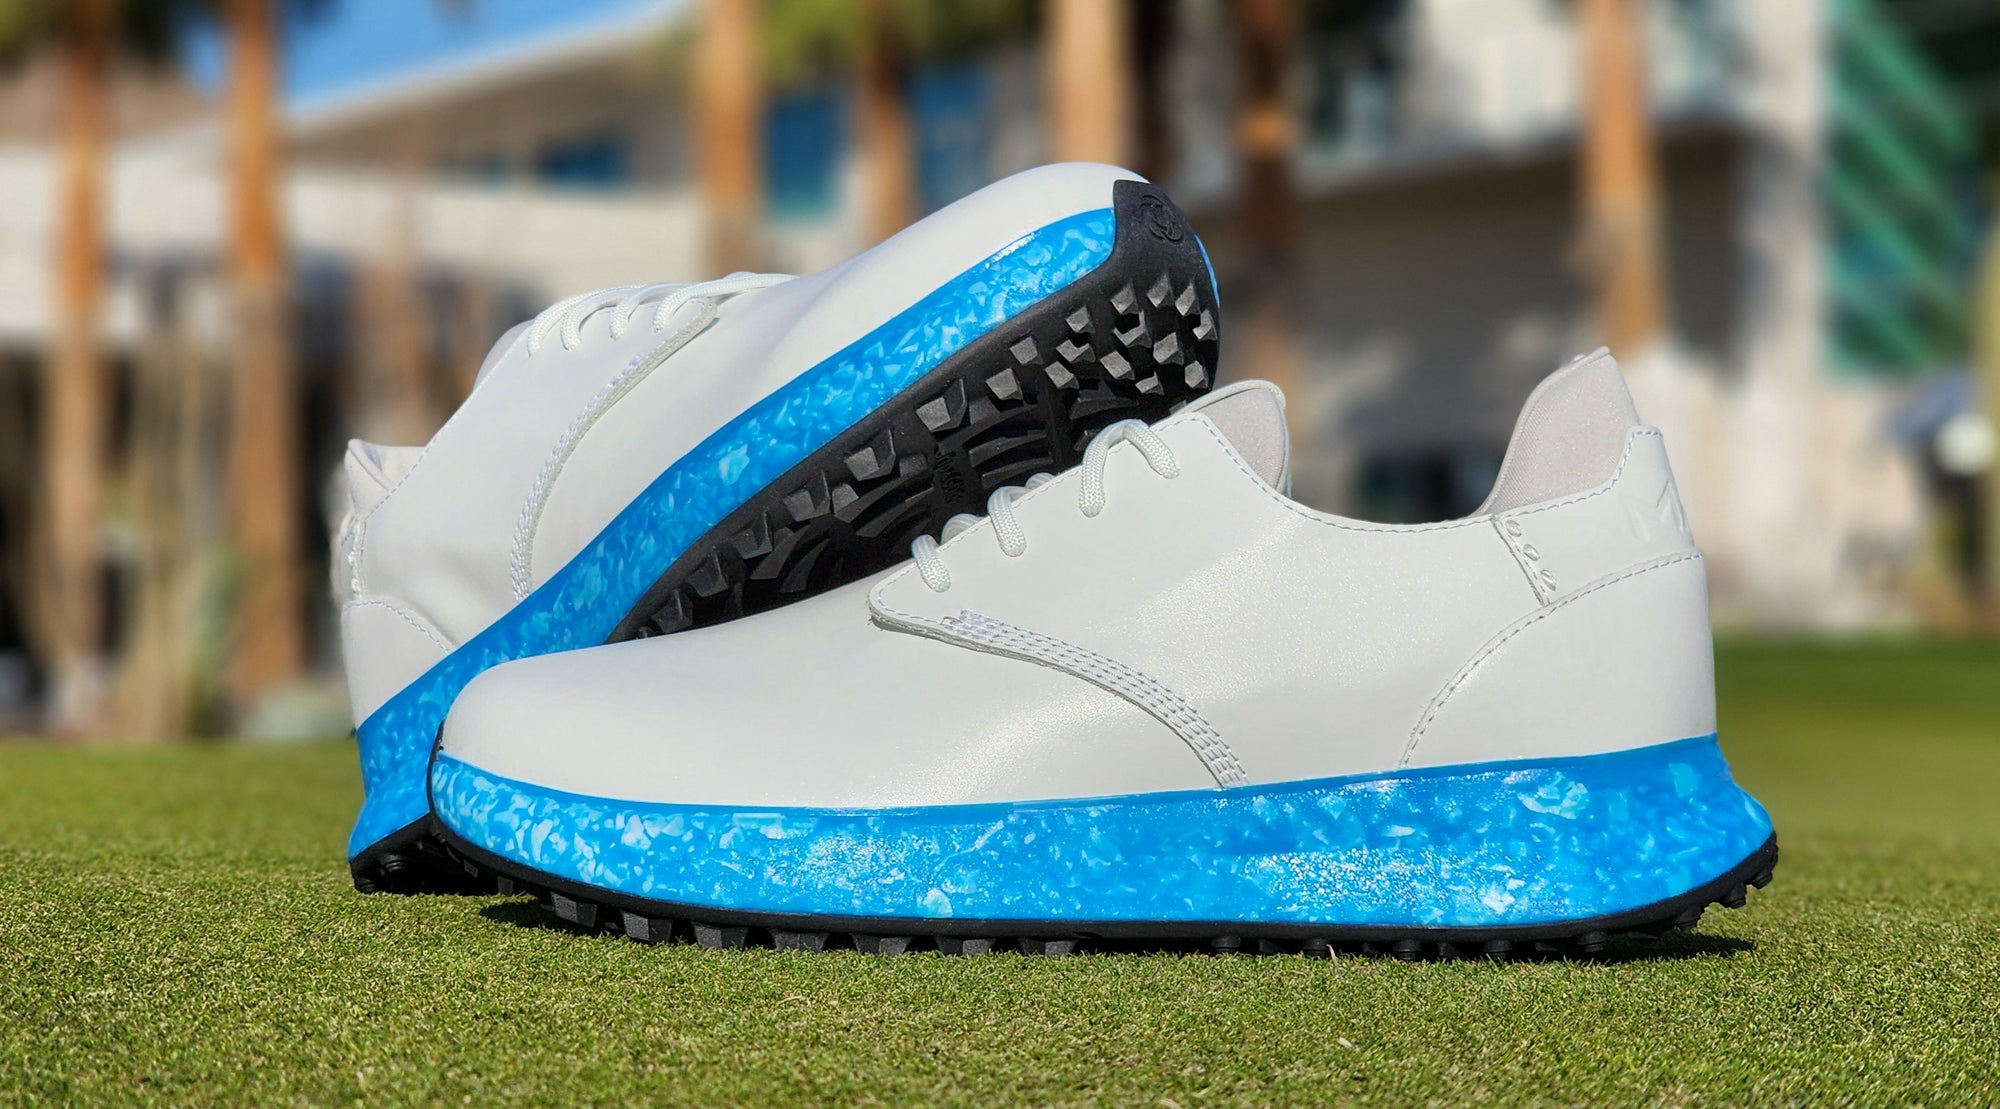 Can You Improve Your Golf Game Just By Changing Your Shoes?